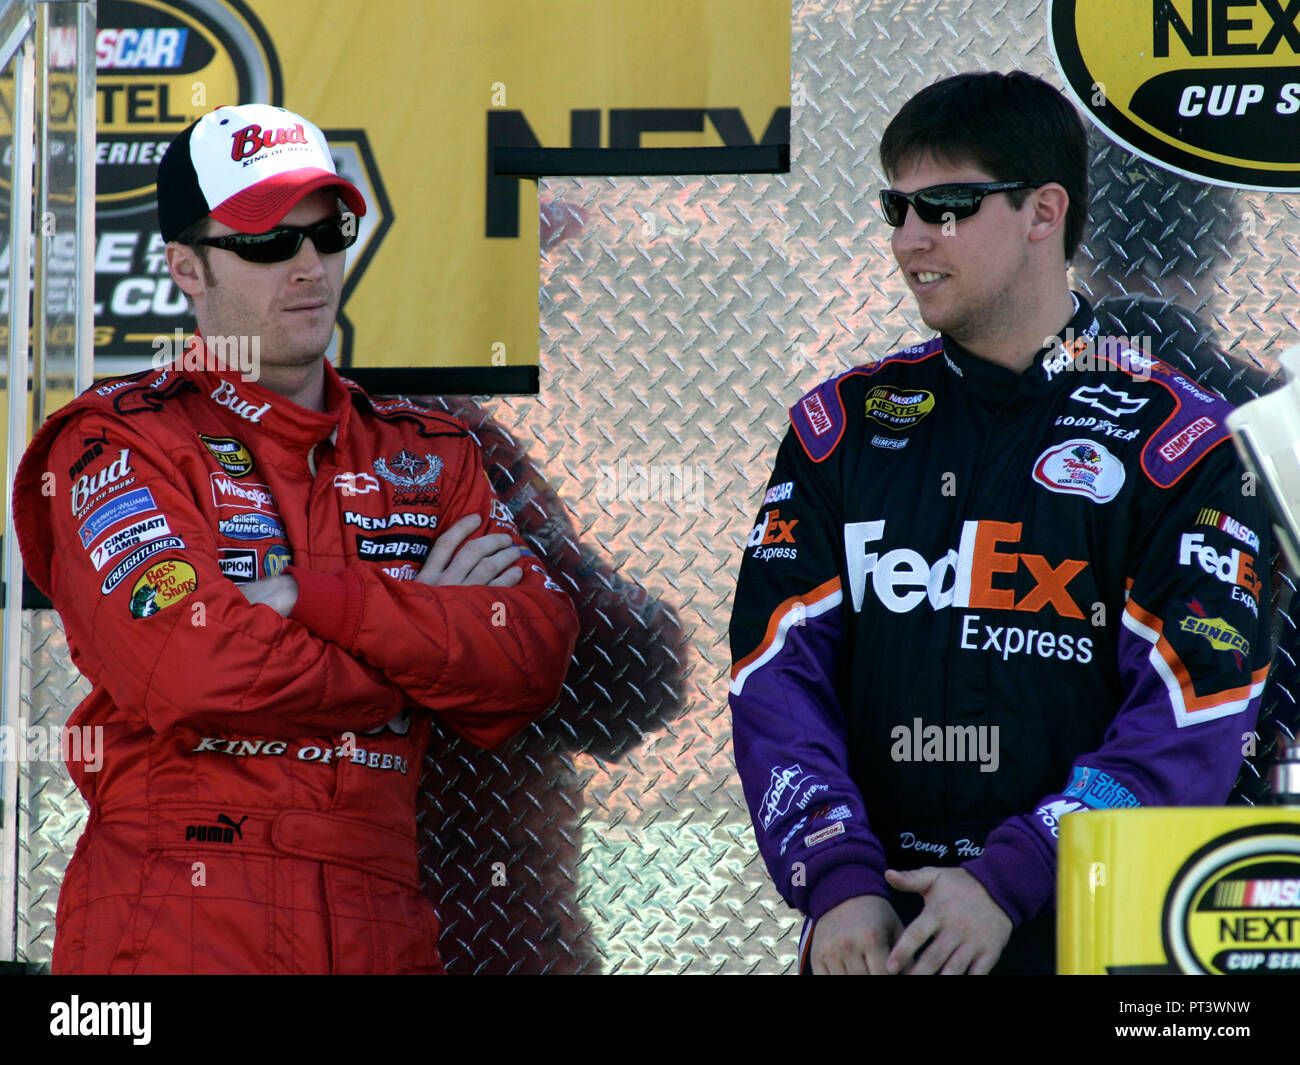 Dale Earnhardt Jr(l) and Denny Hamlin are introduced during driver introductions prior to the Nextel Cup Ford 400 at Homestead-Miami Speedway in Homestead, Florida on November 19, 2006. Stock Photo